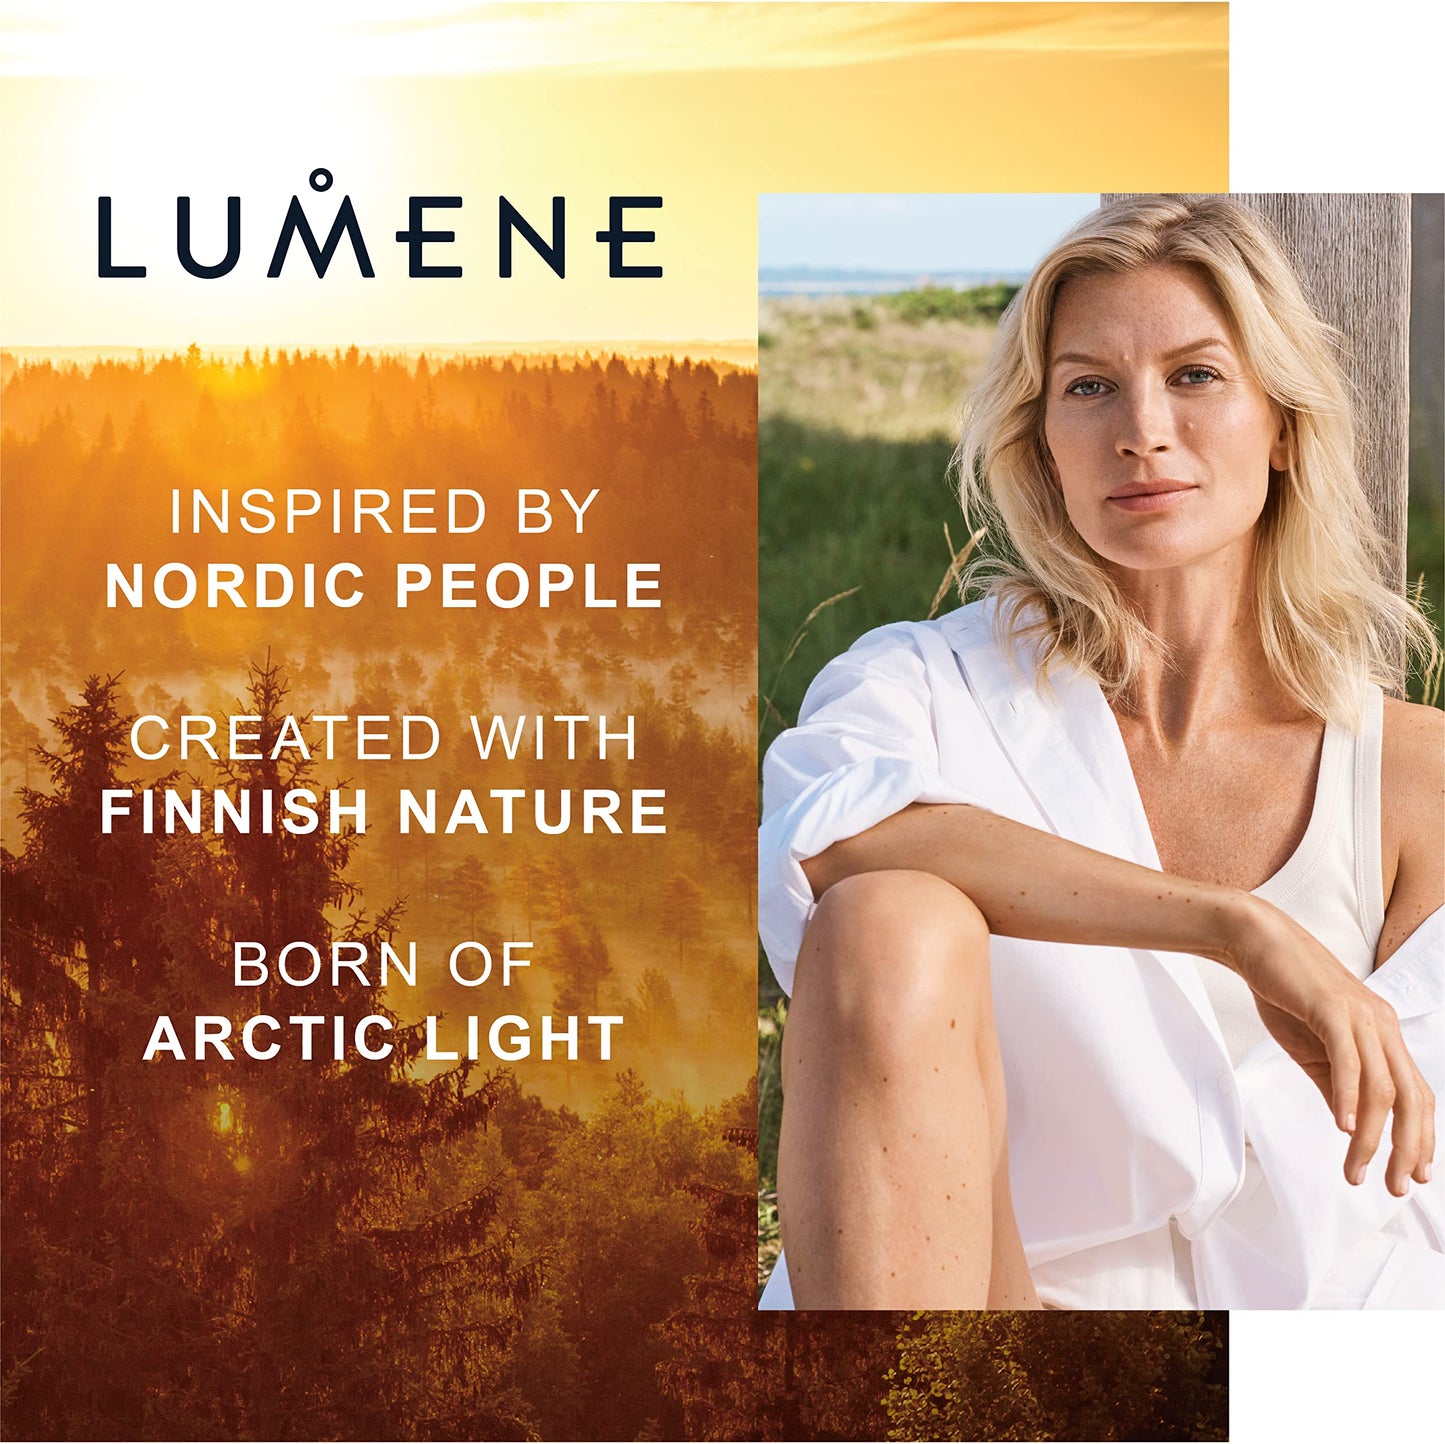 Lumene Invisible Illumination [Kaunis] Instant Glow Skin Tint - Buildable Skin Tint Foundation with a Natural, Radiant Finish - Hydrates + Brightens Dull, Dry Skin - Universal Medium (30ml)